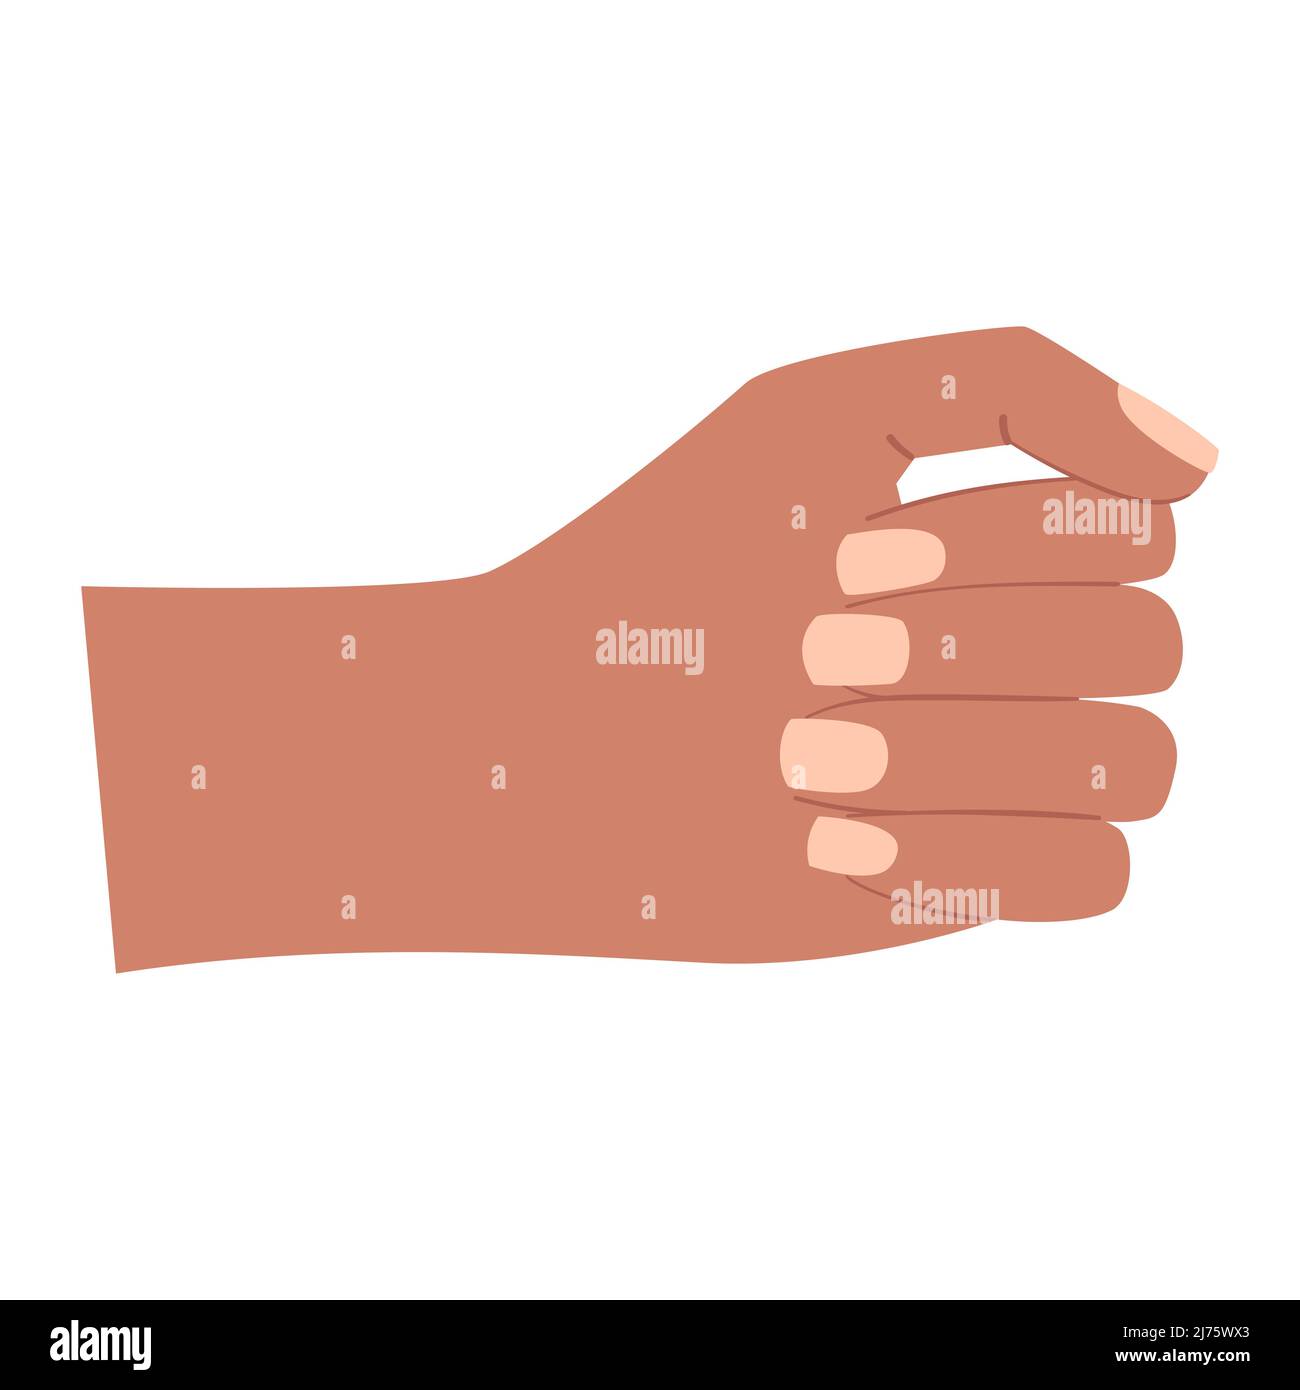 A human hand. A clenched, closed palm. Gesture. Holds something vertical. An empty fist. Color vector illustration isolated on white background. Stock Vector